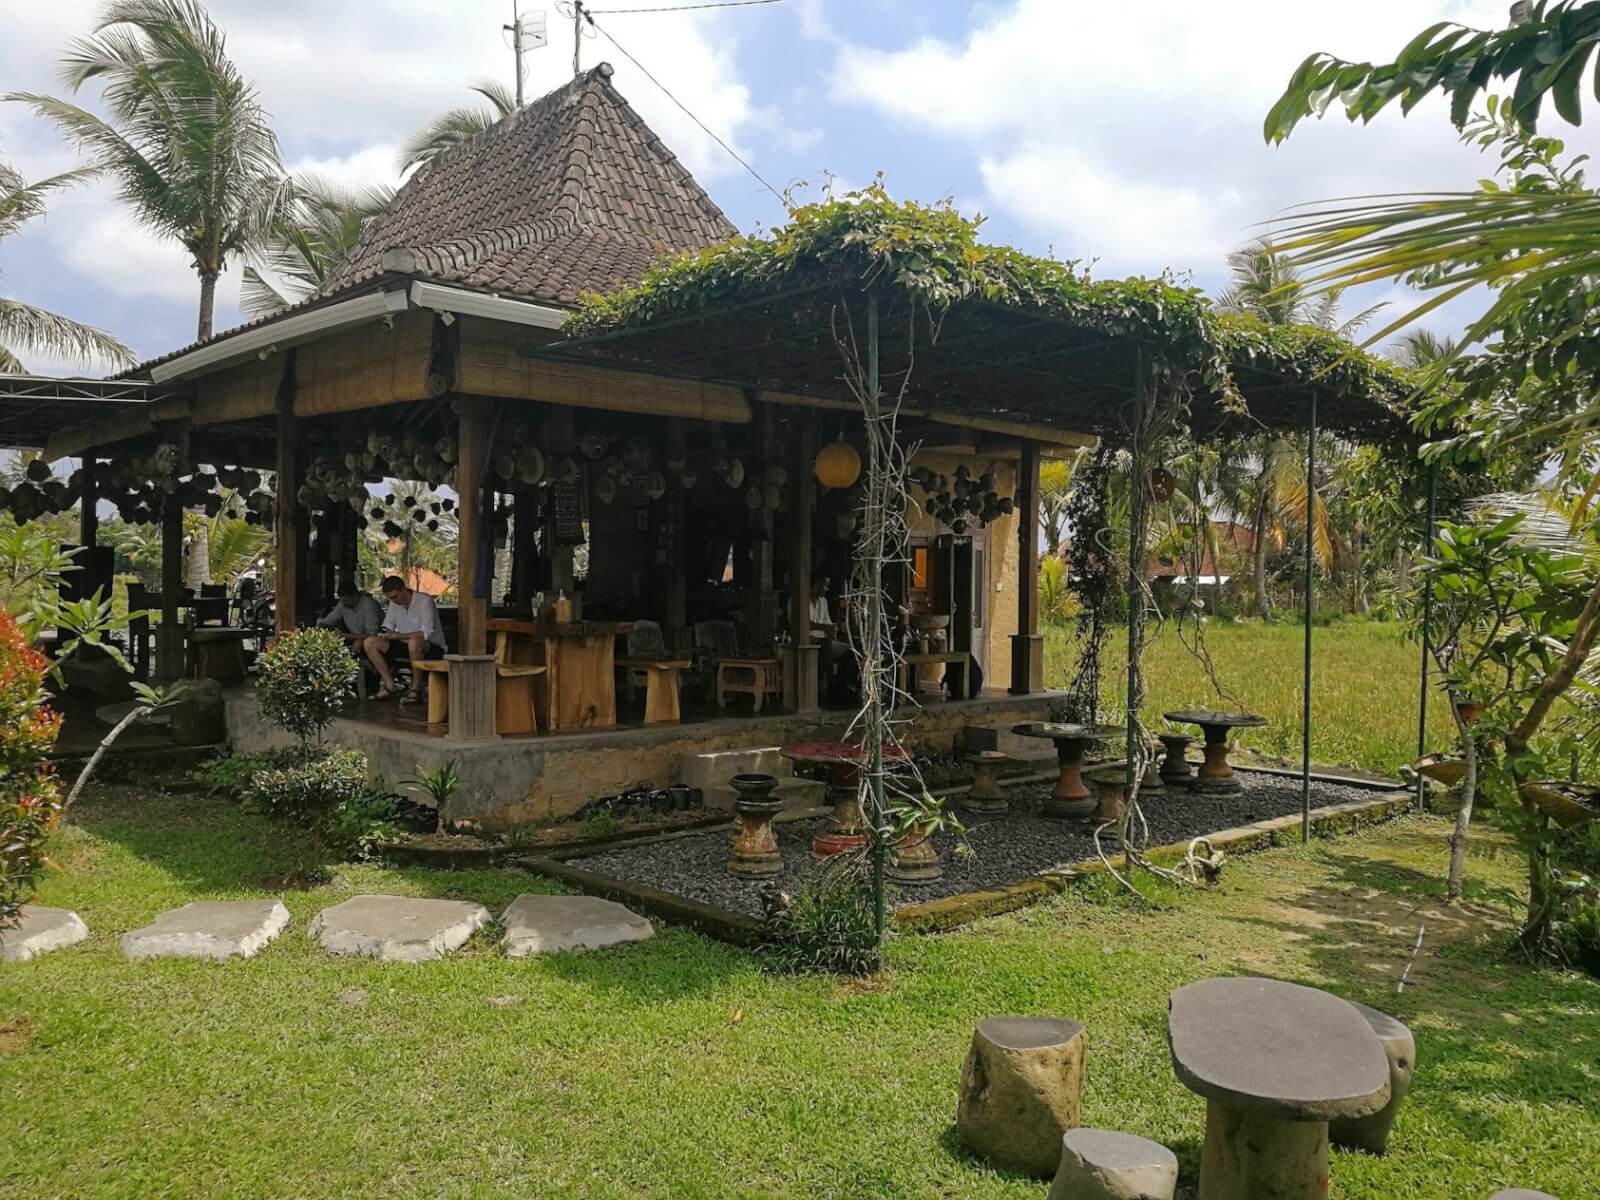 A restaurant in the paddy fields 